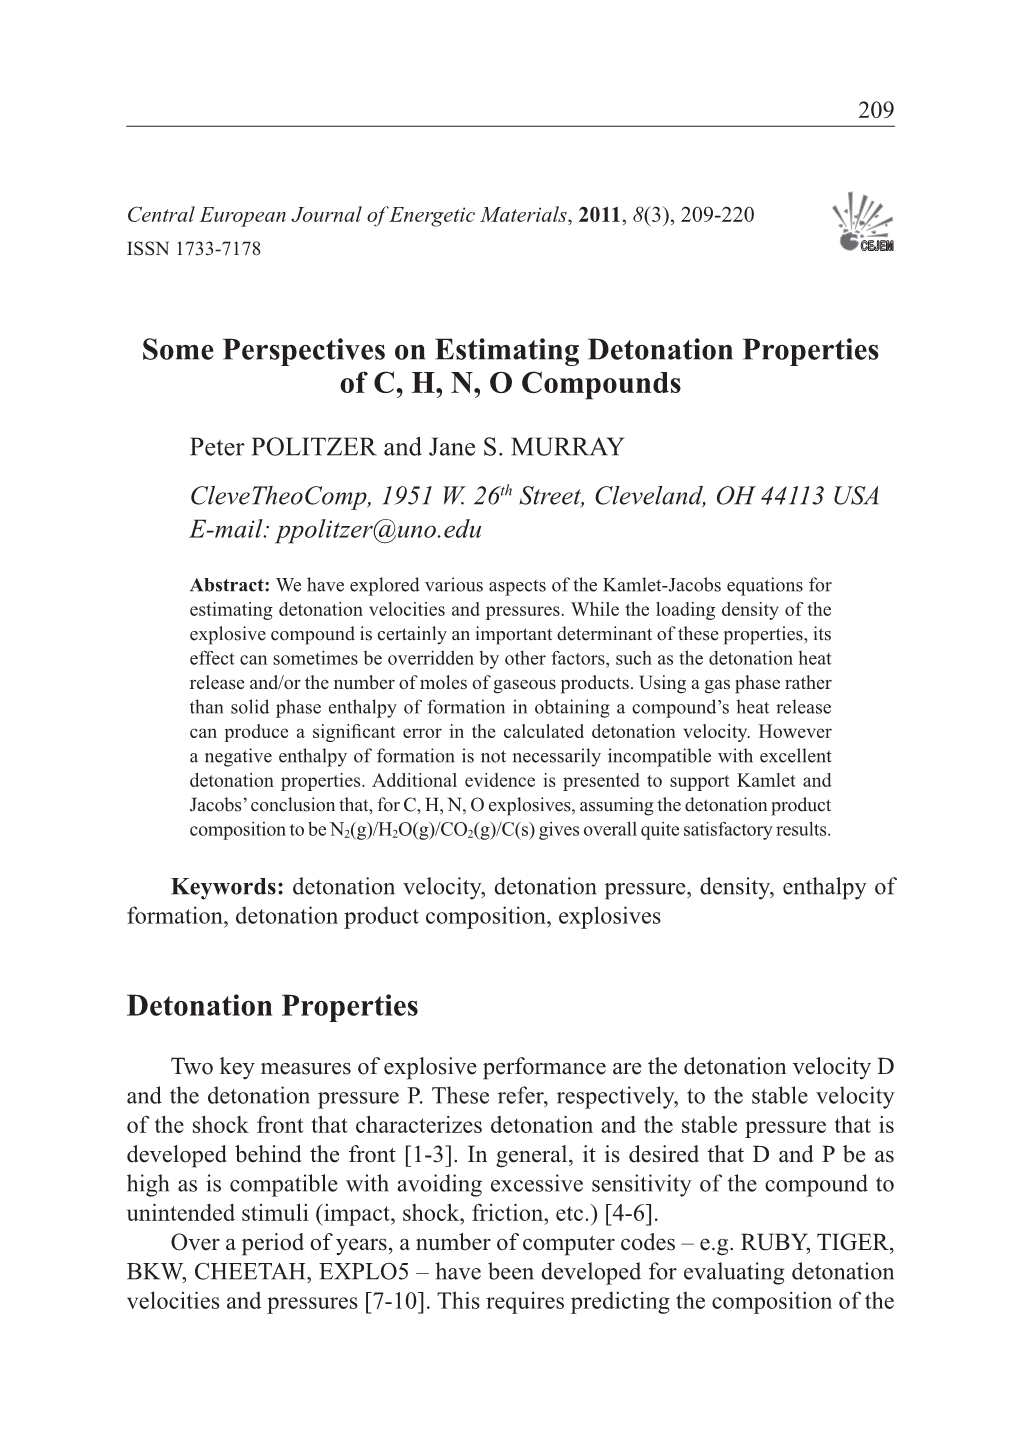 Some Perspectives on Estimating Detonation Properties of C, H, N, O Compounds 209